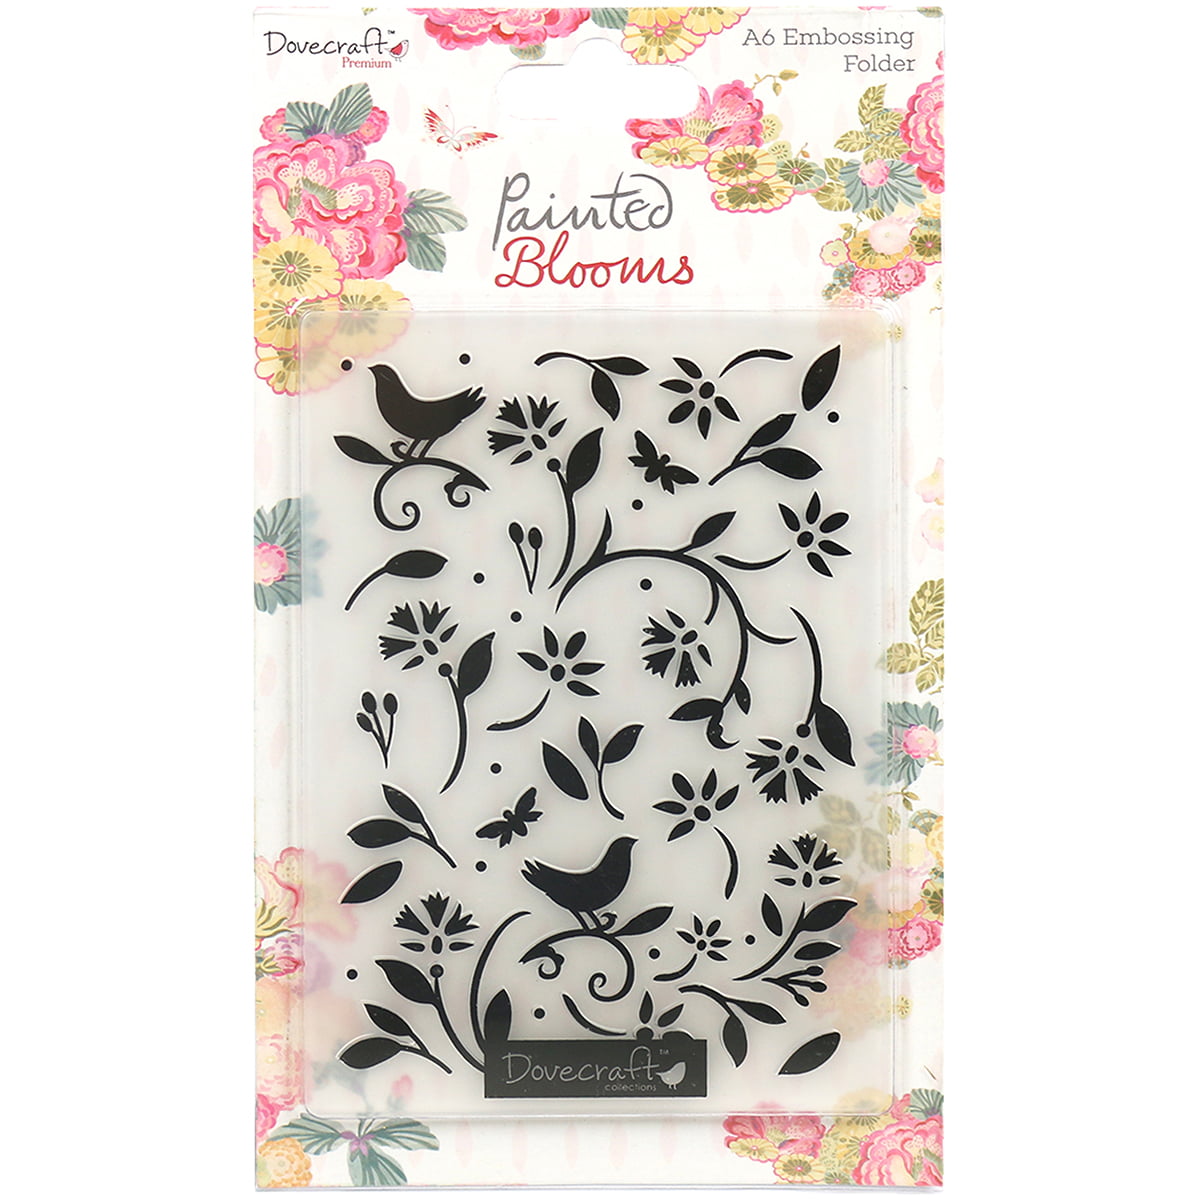 FLORAL FLOWERS DOVECRAFT A6 EMBOSSING FOLDER DCEMB006 BLOOMING LOVELY 